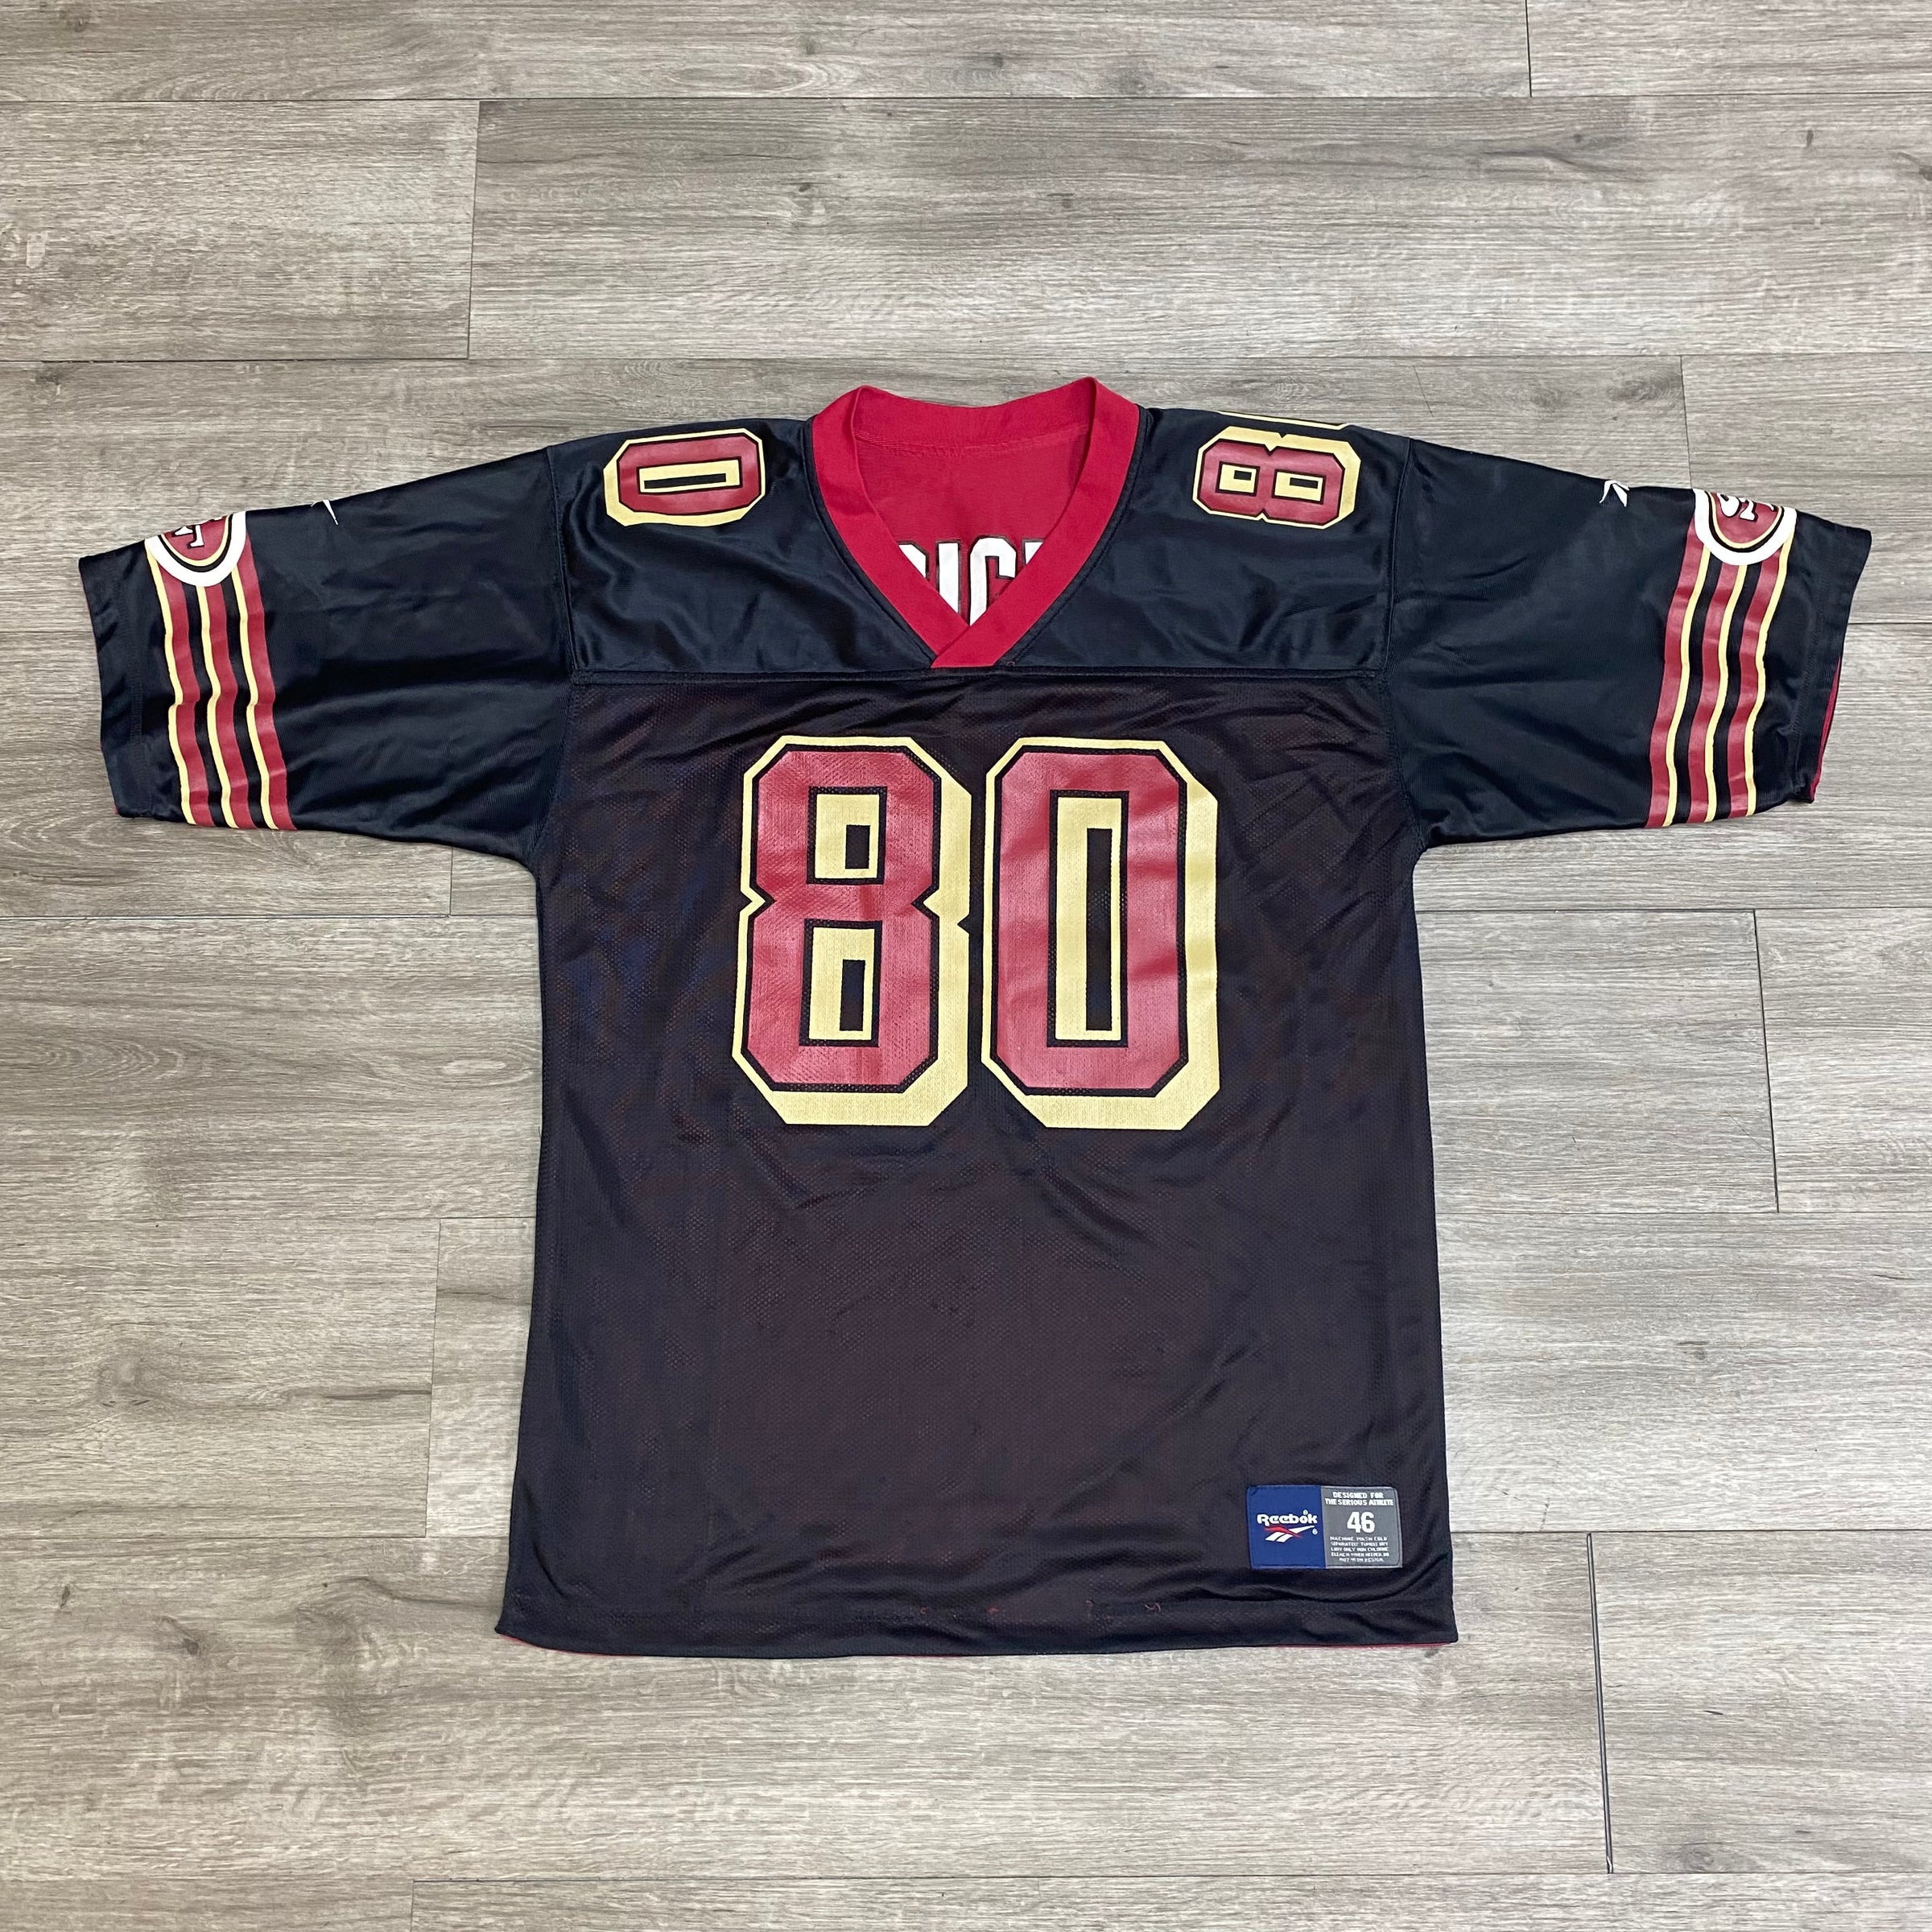 49ers jersey afterpay